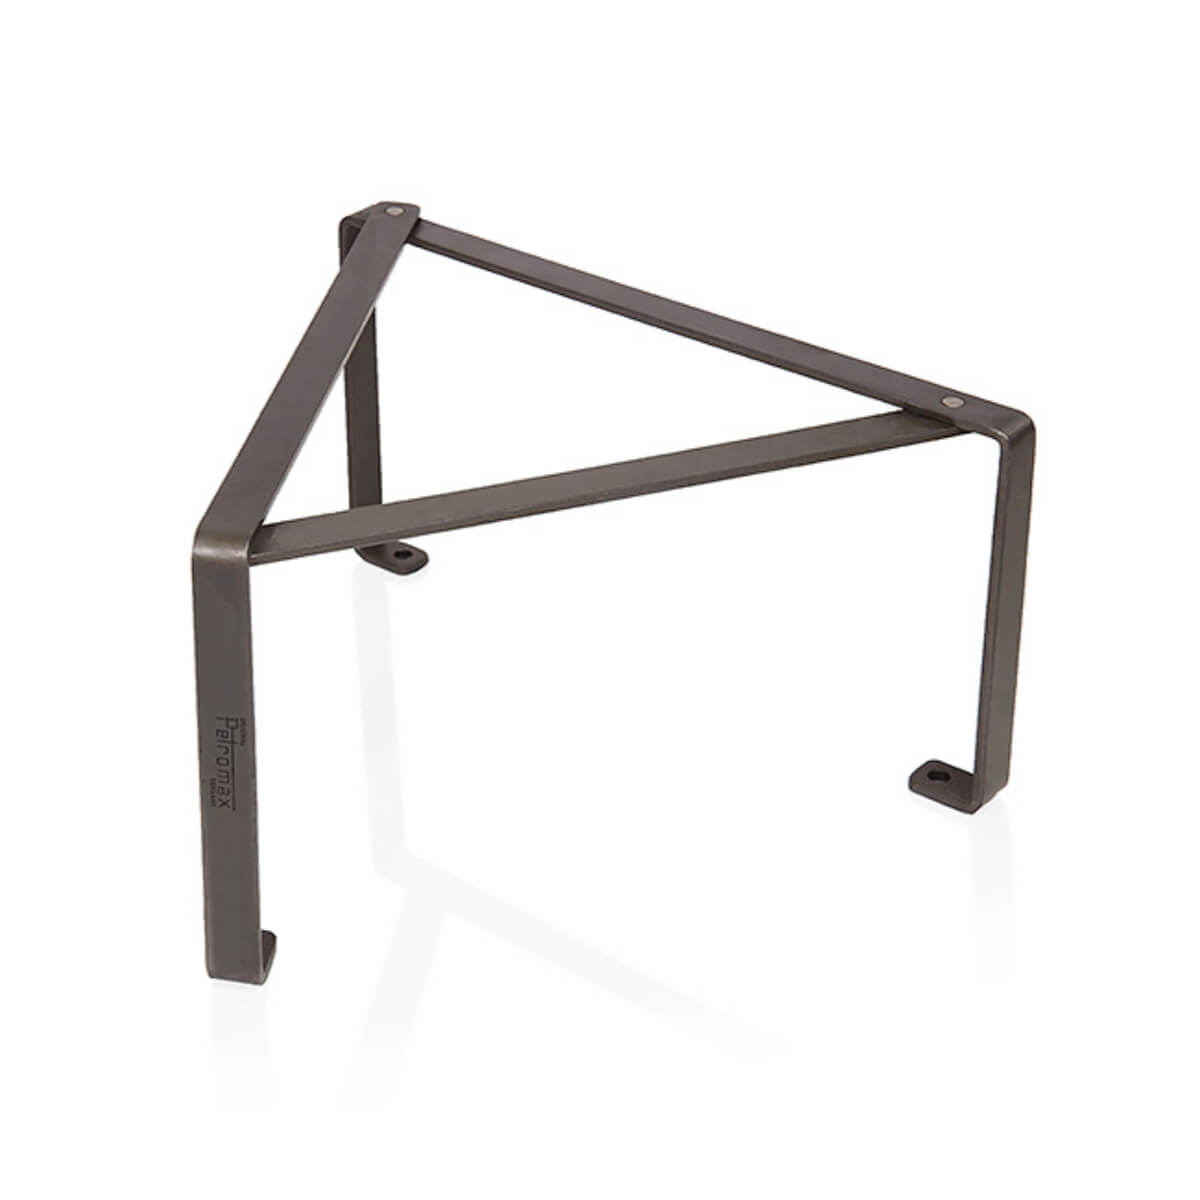 Petromax Cooking Stand for Cooking Over Open Fire